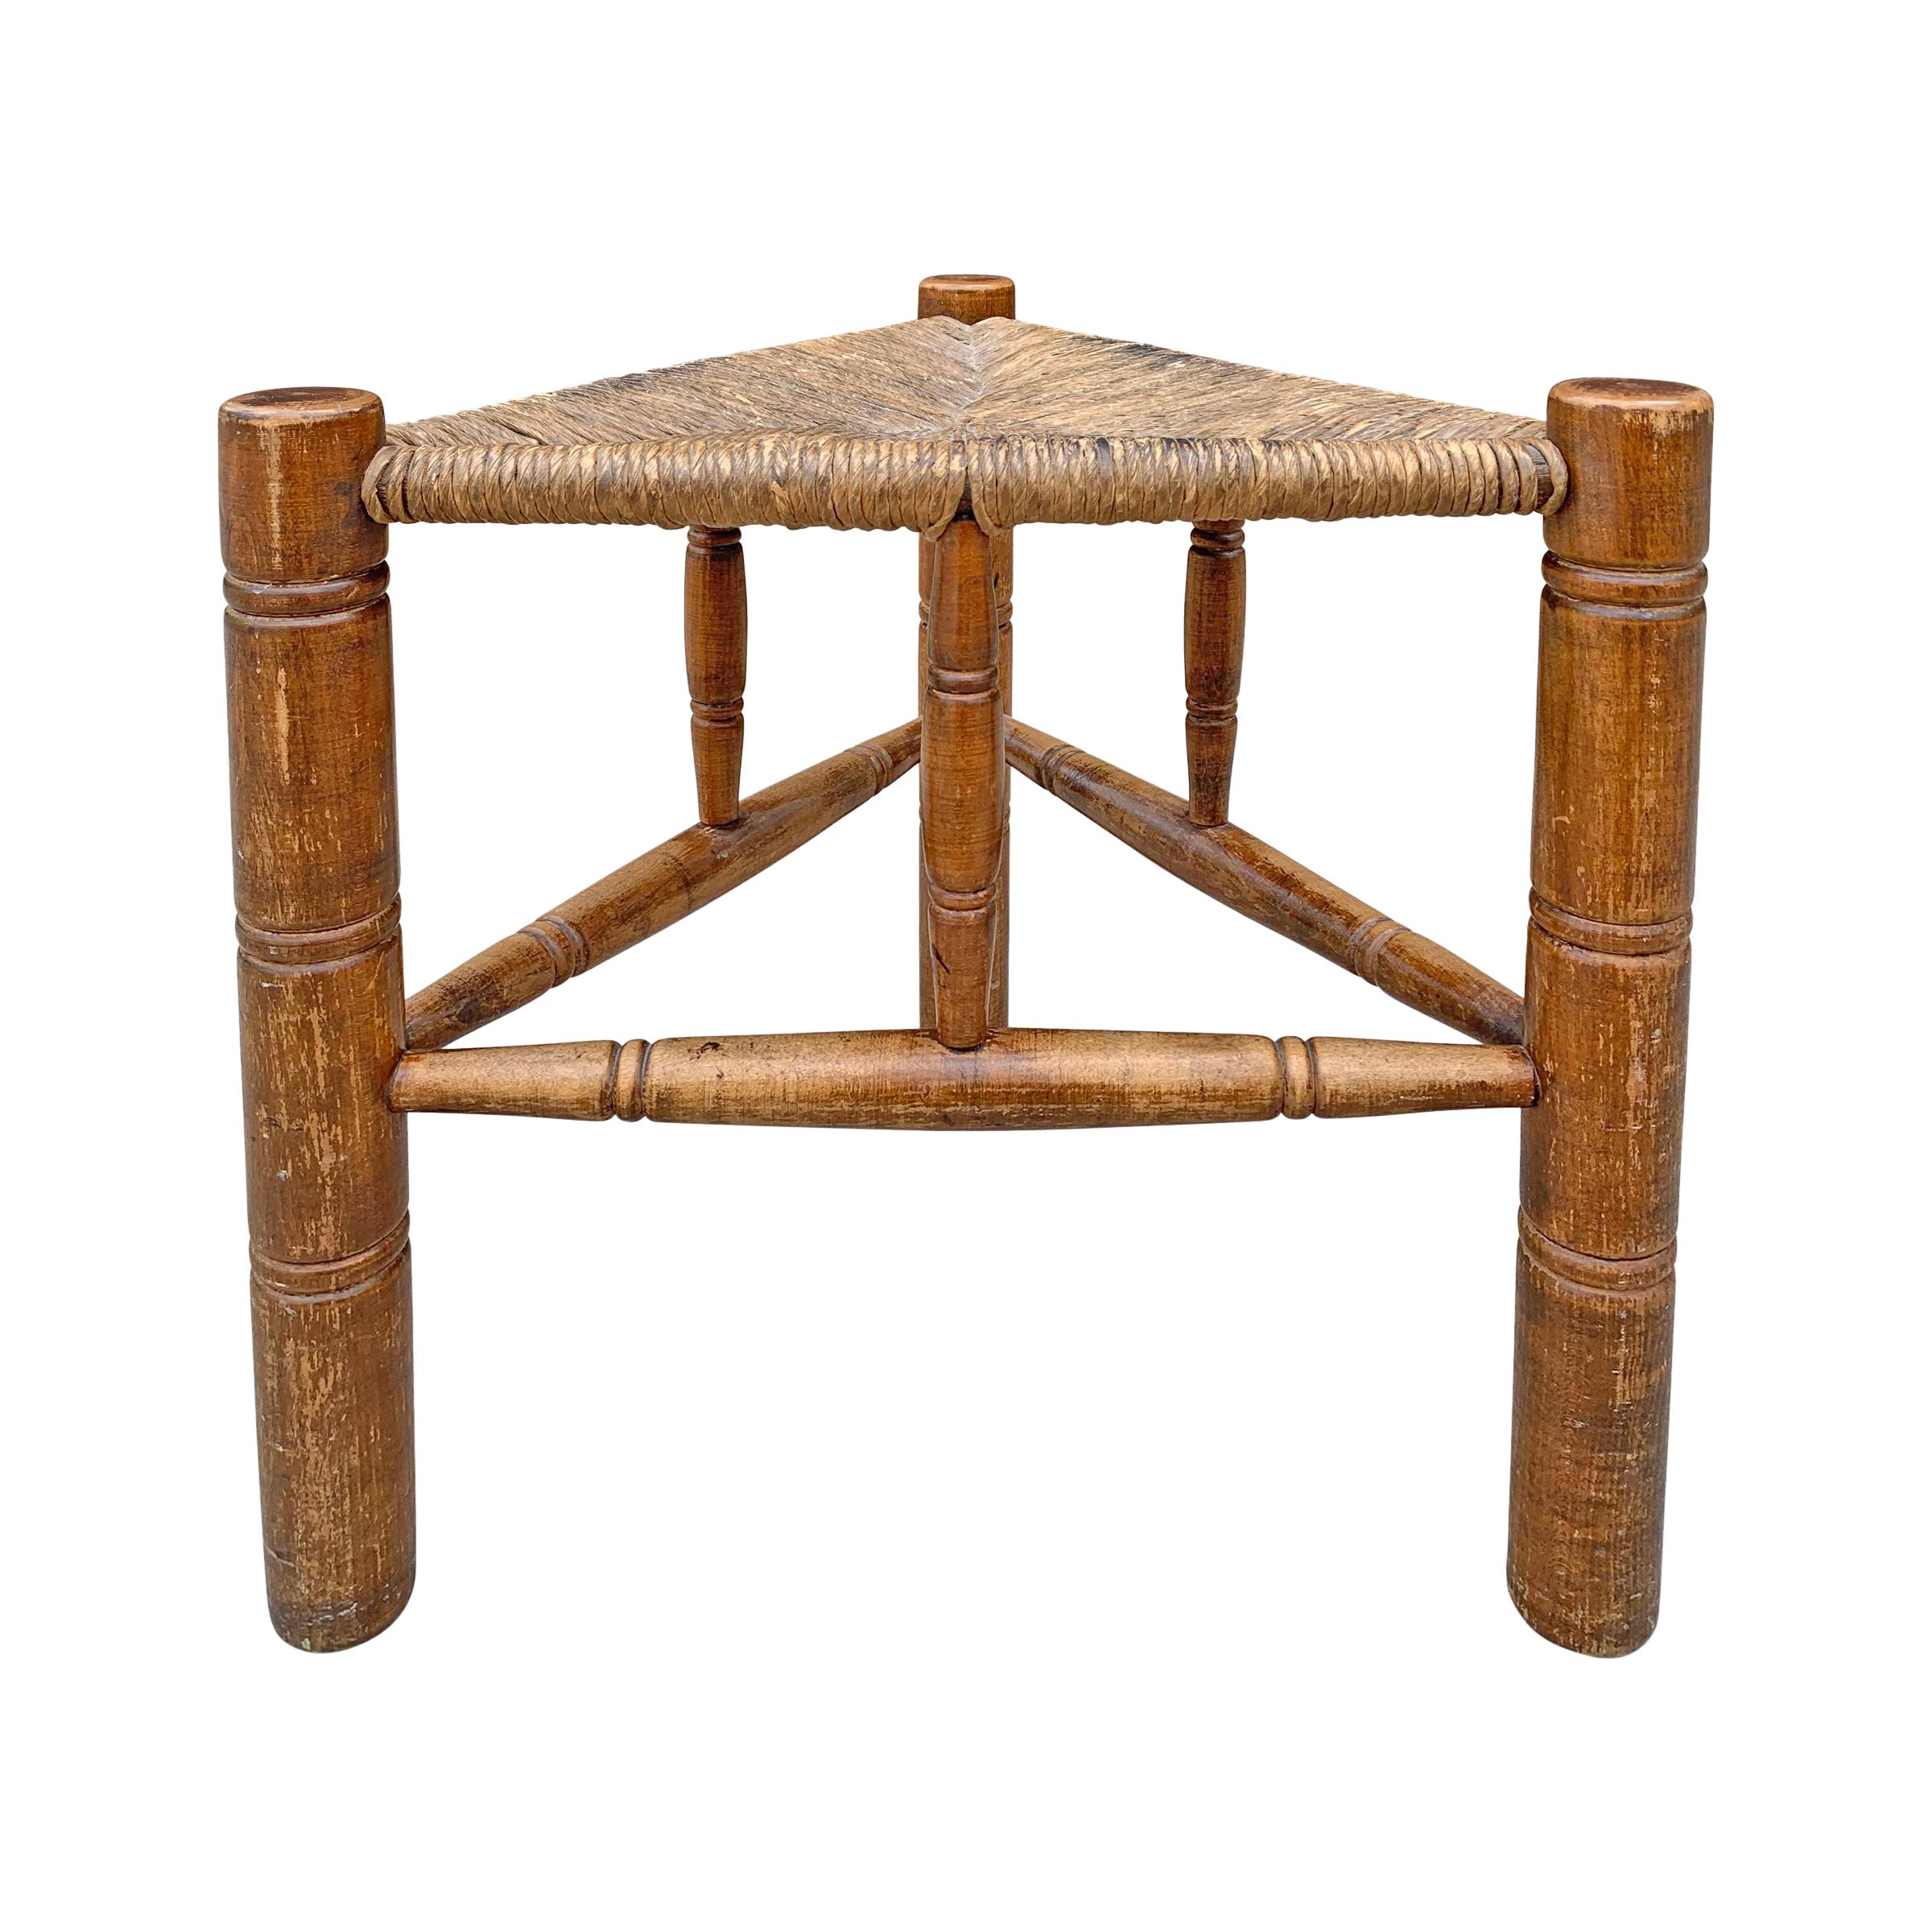 Three-Legged Stool with a Woven Rush Seat by Wallace Nutting